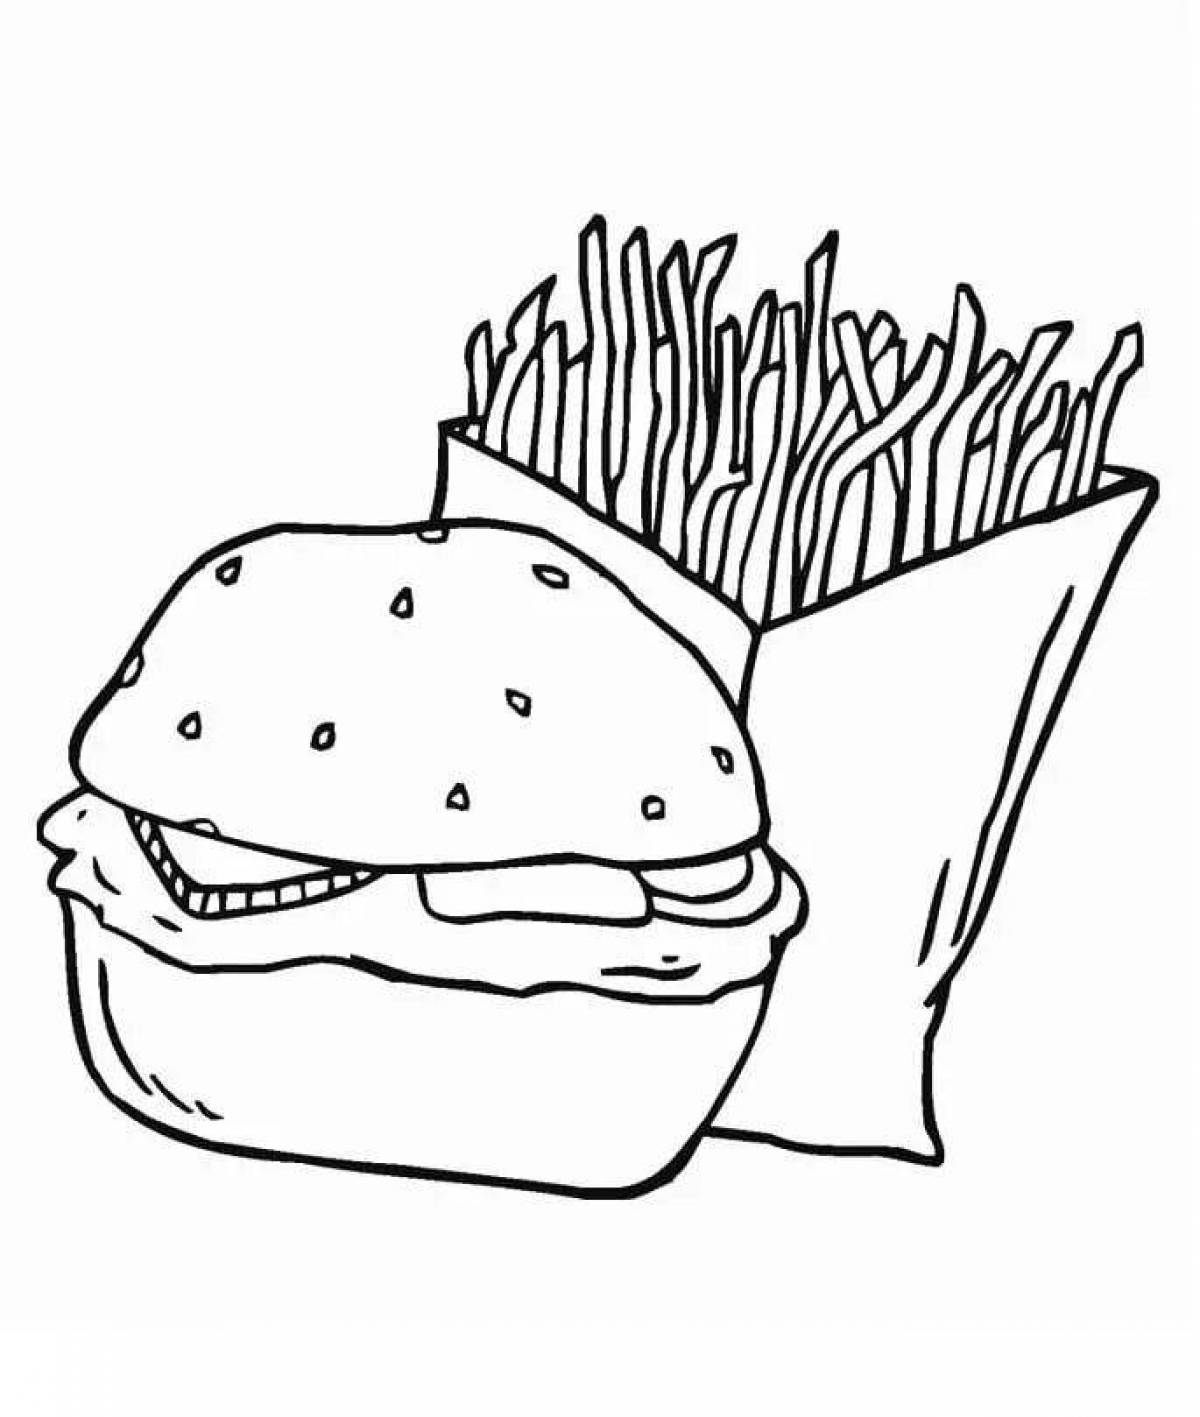 Spicy burger and french fries coloring page